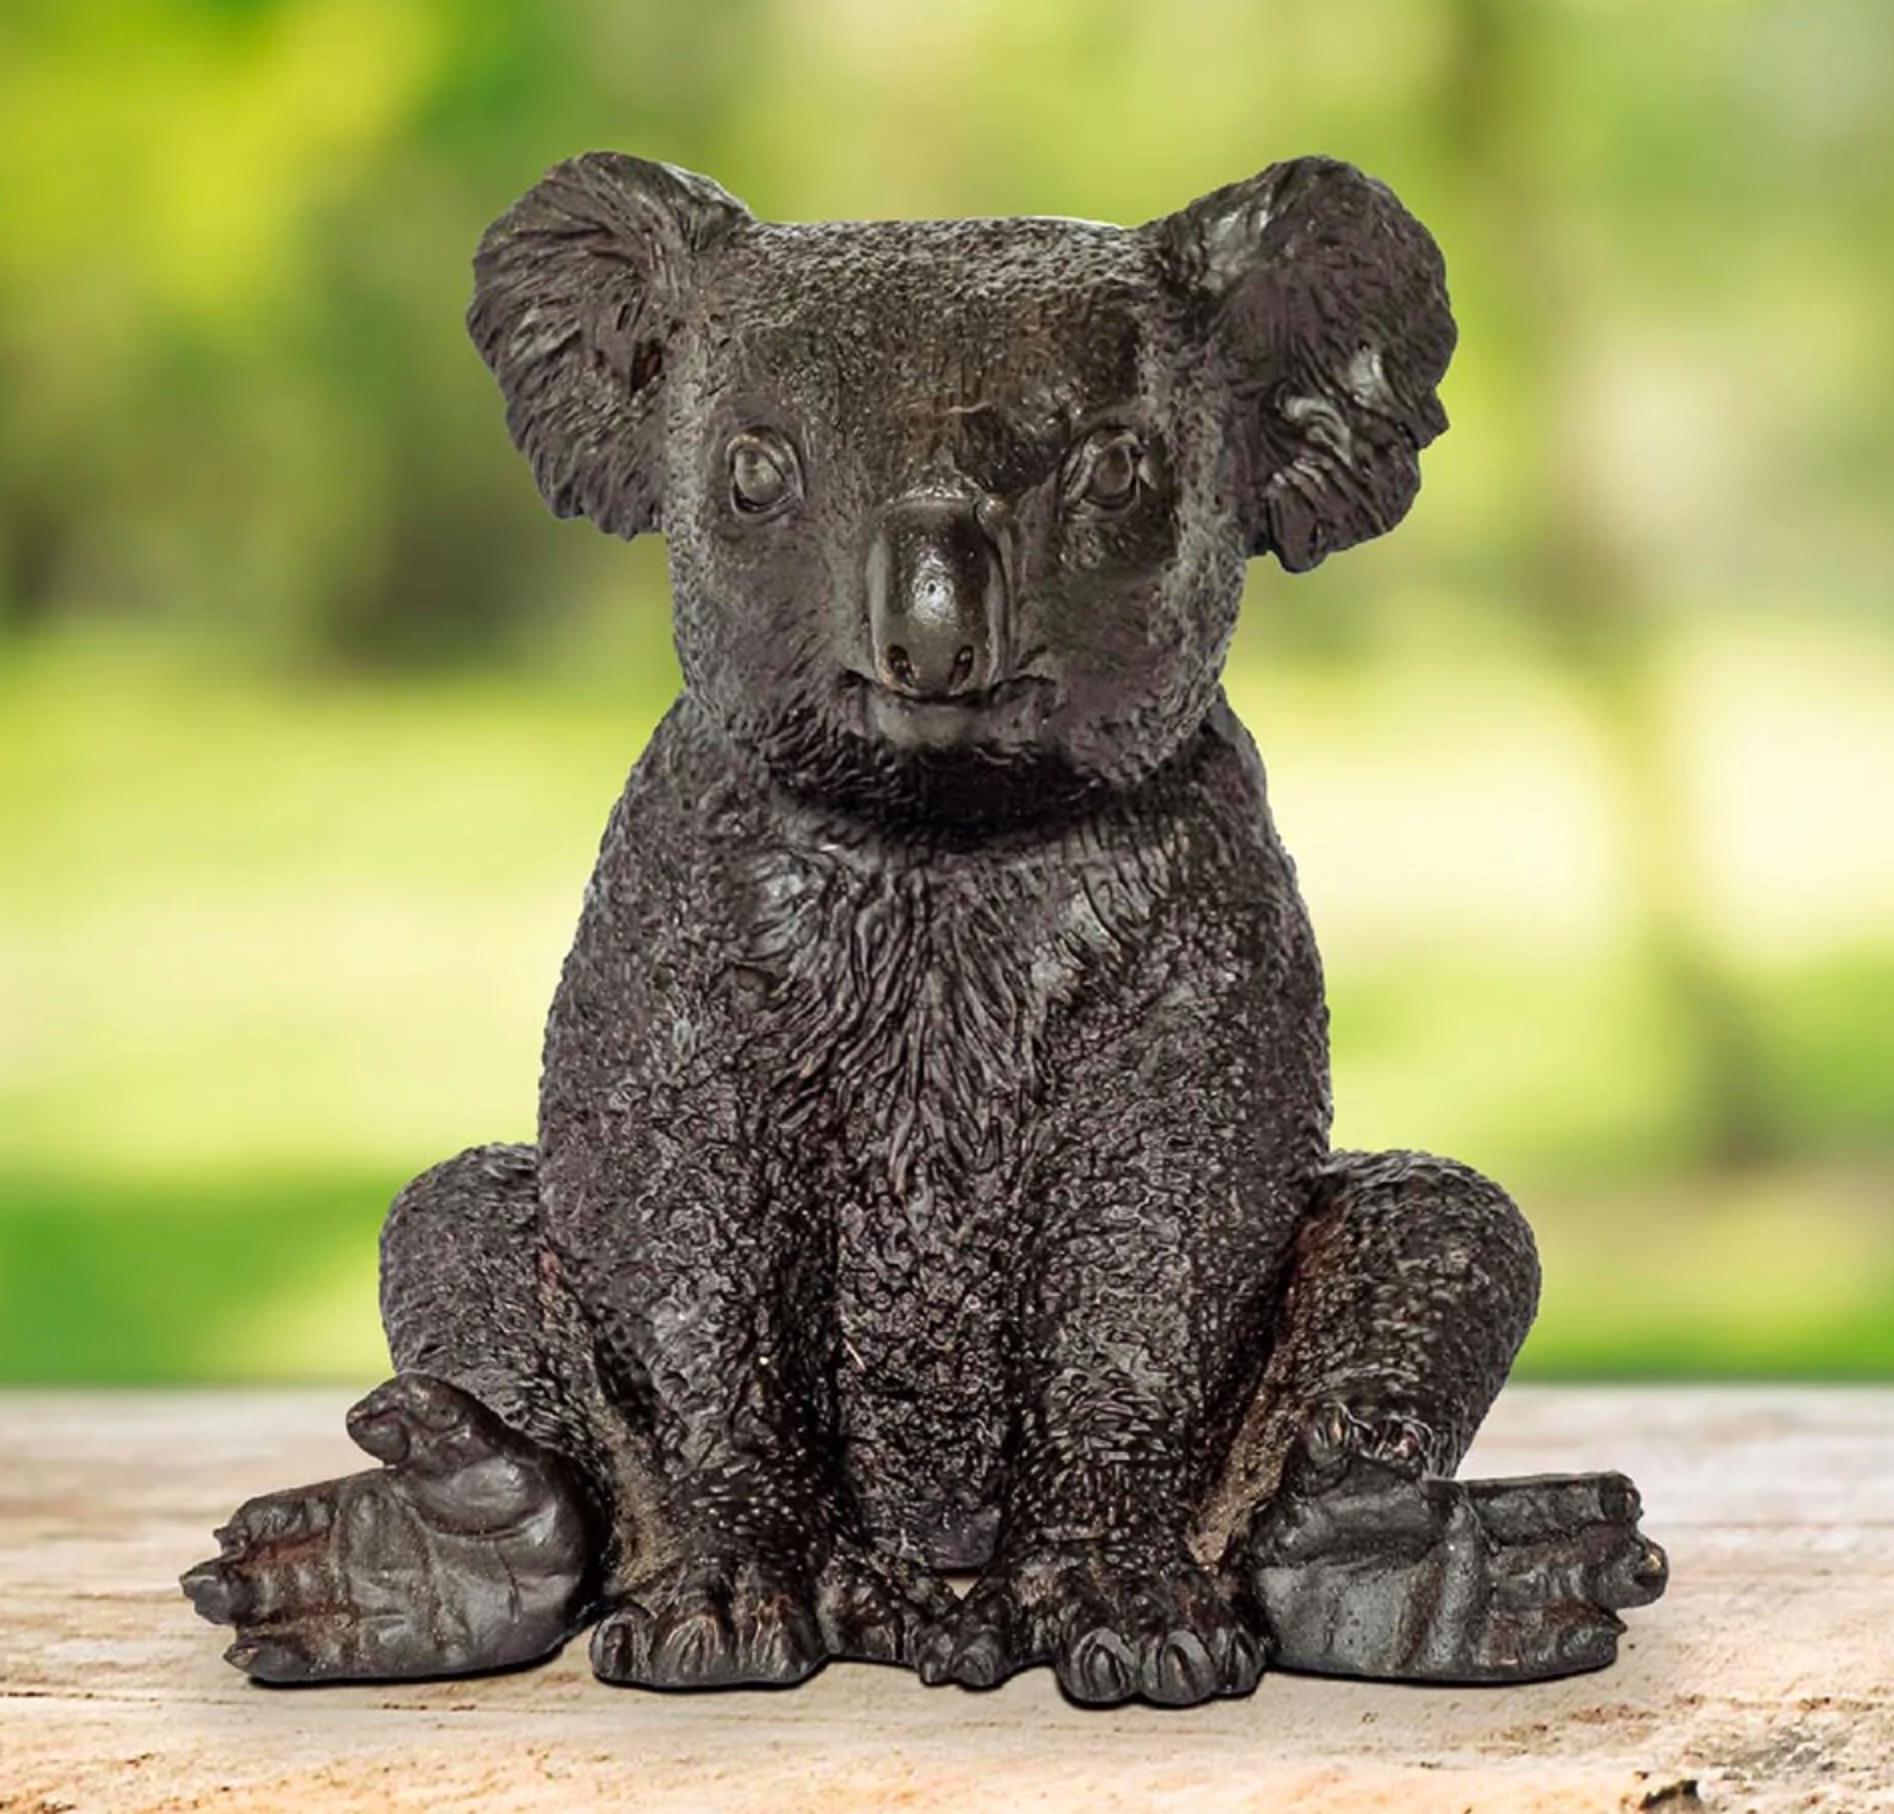 Title: Suzie the koala is happy
Authentic bronze sculpture

This authentic bronze sculpture titled 'Suzie the koala is happy' by artists Gillie and Marc has been meticulously crafted in bronze. It features a koala sitting and comes in a